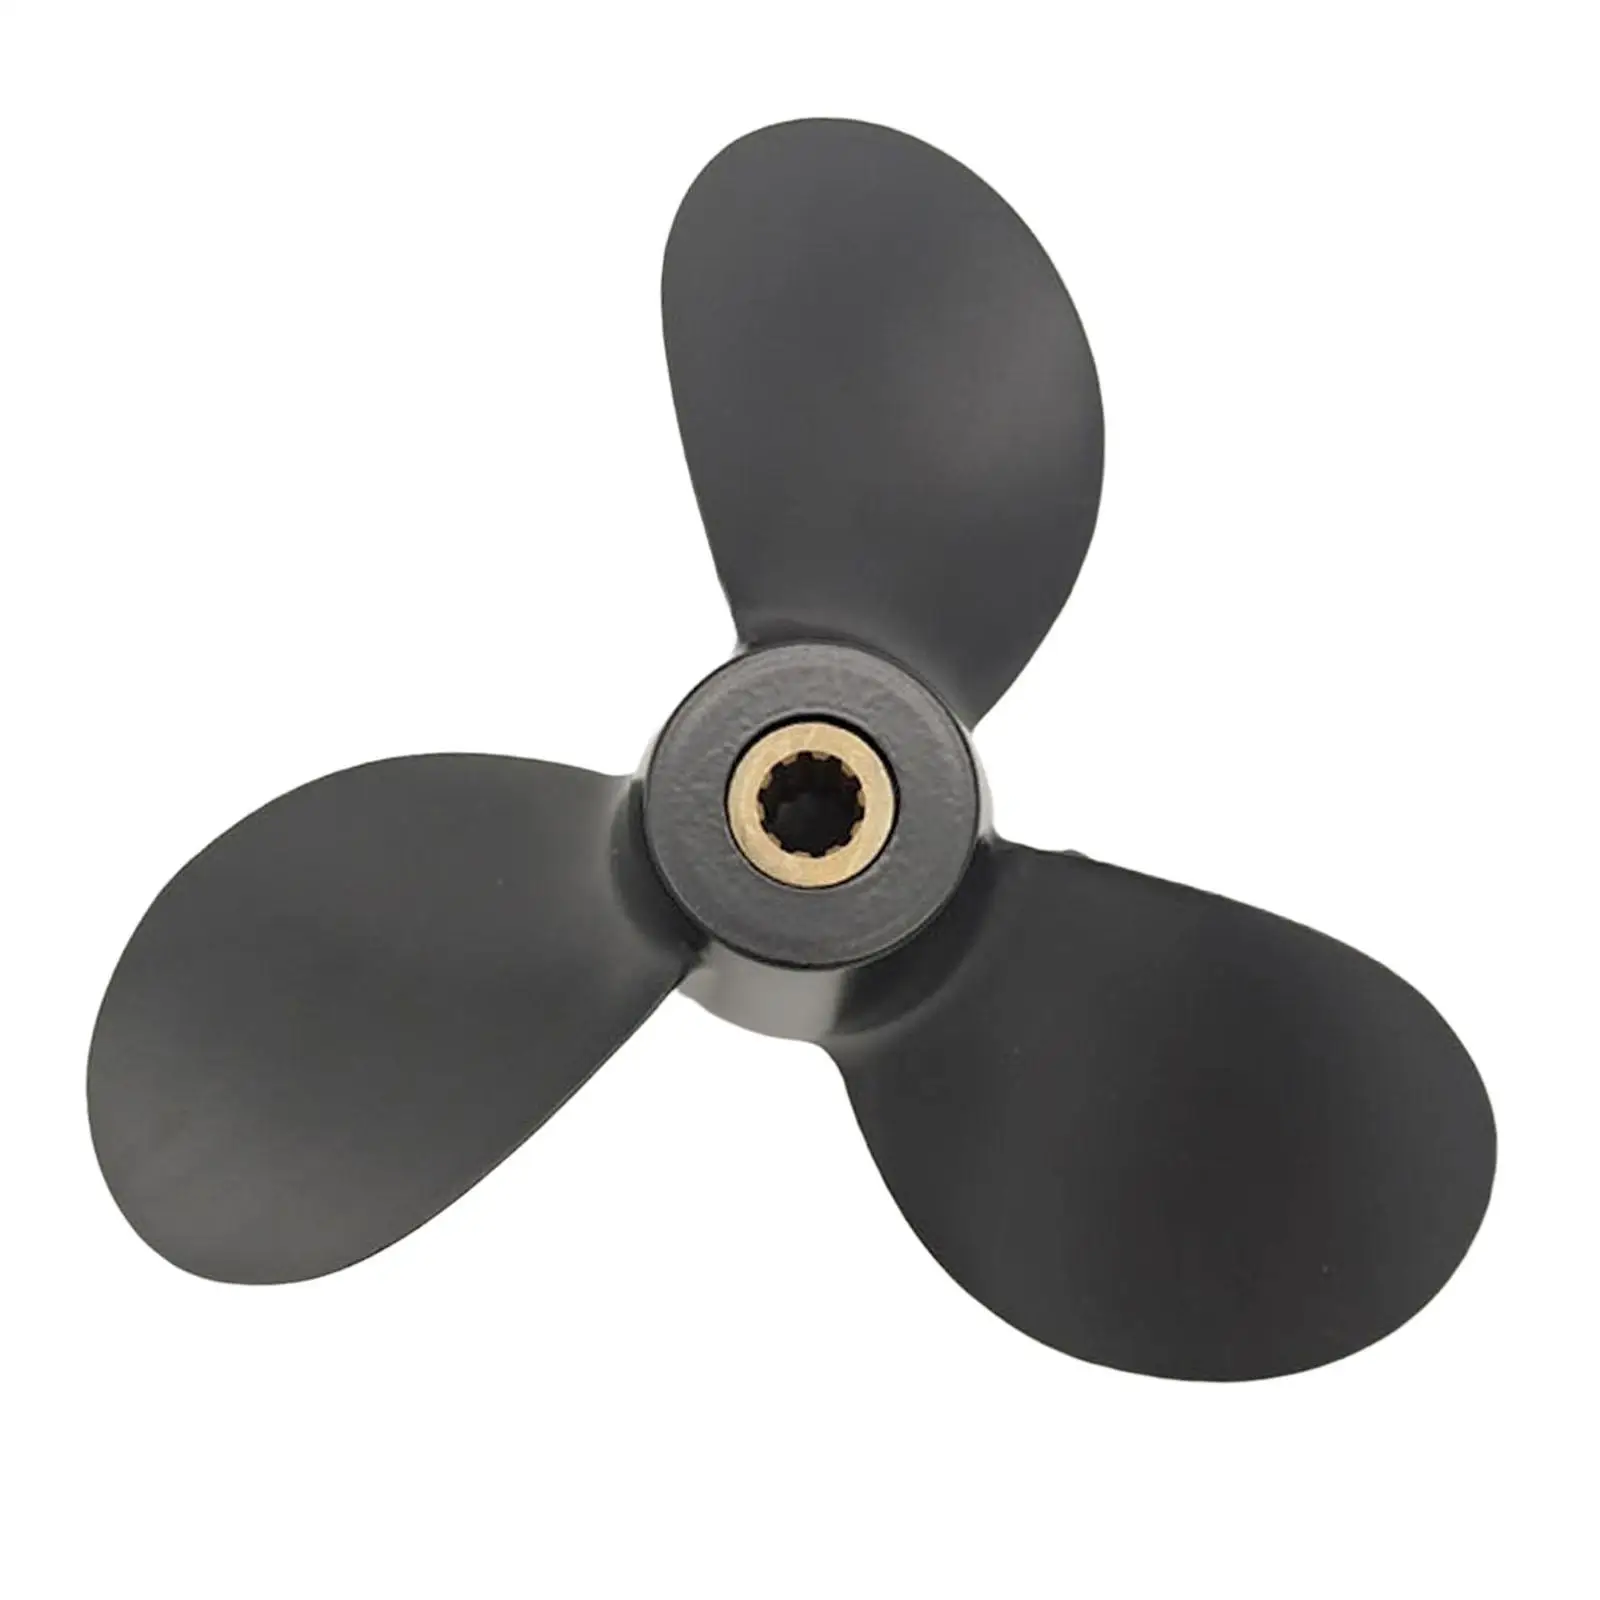 Marine Boat Propeller 7 1/2x7 58111-98651-019 Accessory Replacement Professional